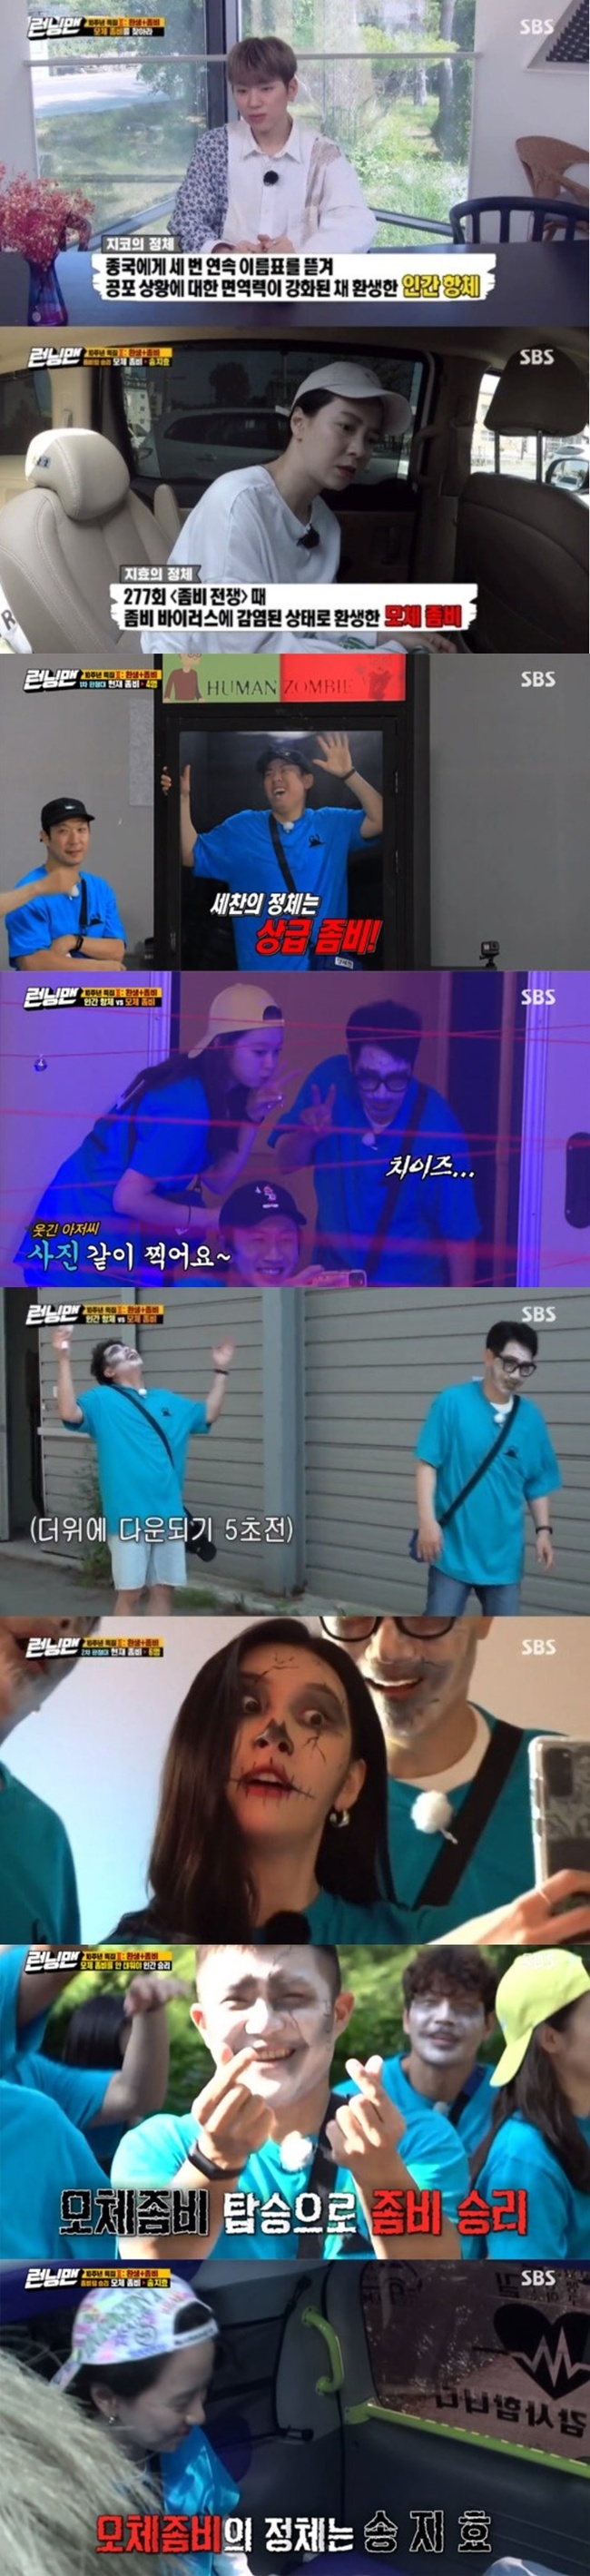 TV viewer ratings soared as Song Ji-hyos truth came to lightSBS Running Man, which was broadcast on July 5, showed the 2020 Dead Again Special, the second part of Legend Race, to mark the 10th anniversary of the broadcast, and recorded 7.1% of the highest TV viewer ratings per minute.Race is the 2020 version of Dead Again Race, which was a big topic with the composition and reversal of time and space in the 1930s and 2013 at the time of broadcasting in 2013.Singer Zico, Sunmi, comedian Jo Se-ho, and actor Lee Do-hyun joined as guests and added meaning.The members were divided into Zico team, Sunmi team, Seho team, and Dohyeon team, and they played against Zombie 2: The Dead are Among Us.In particular, Zombie 2: The Dead are Among Us had to be divided into the top-level Zombie 2: The Dead are Among Us and the bottom-level Zombie 2: The Dead are Among Us, and then found a decision ticket to set up the top-level Zombie 2: The Dead are Among Us on the judging panel.With comedian Ji Seok-jin being attacked by Zombie 2: The Dead are Among Us and becoming a junior Zombie 2: The Dead are Among Us, Yang Se-chan, who was on the judging board for the first time, failed to find a vaccine and became a senior Zombie 2: The Dead are Among Us.Since then, the members have become senior, junior Zombie 2: The Dead are Among Us, narrowing the position of humans.Among them, Yoo Jae-Suk survived and found the Infection room by chance, and he got into the emergency car with Zico, who revealed that he was a human antibody, and Song Ji-hyo, who ate the vaccine.But it turns out that Song Ji-hyo is the mother of Zombie 2: The Dead are Among Us, and humans are defeated.The scene took the best minute with top TV viewer ratings of 7.1% per minute.